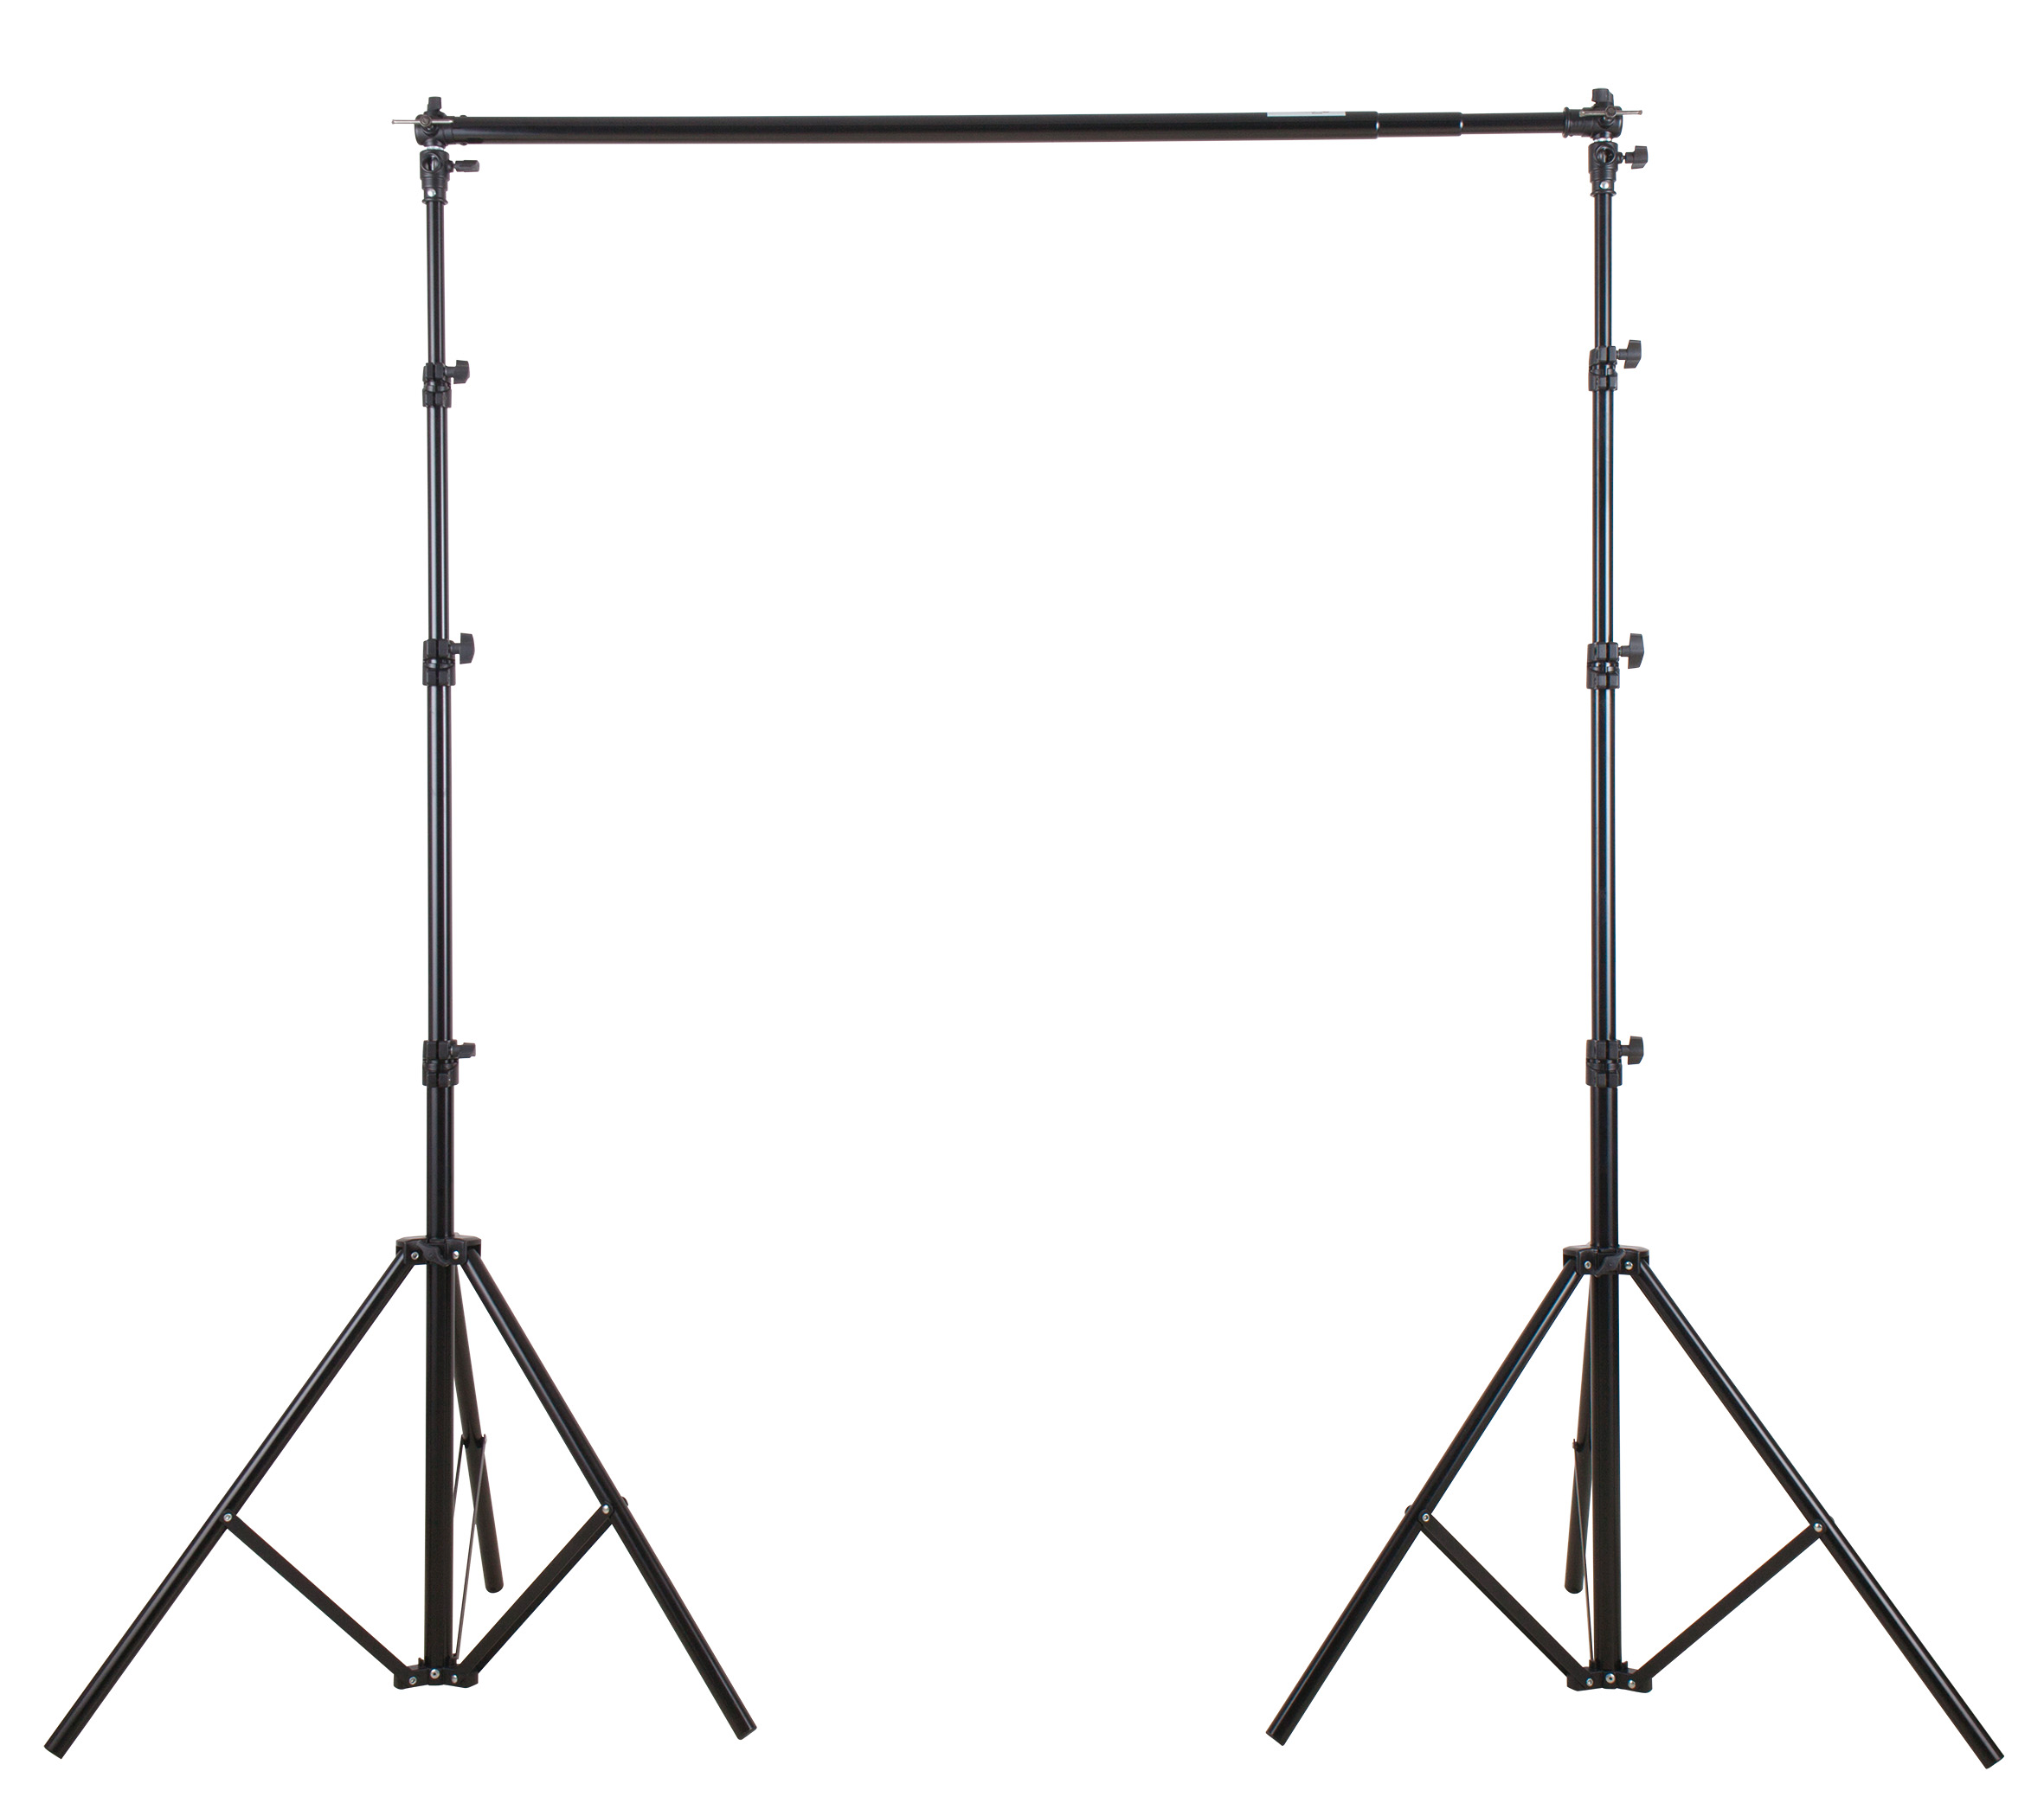 Ercole L-2900FPG Background Stand Kit with telescopic crossbar – TecArt